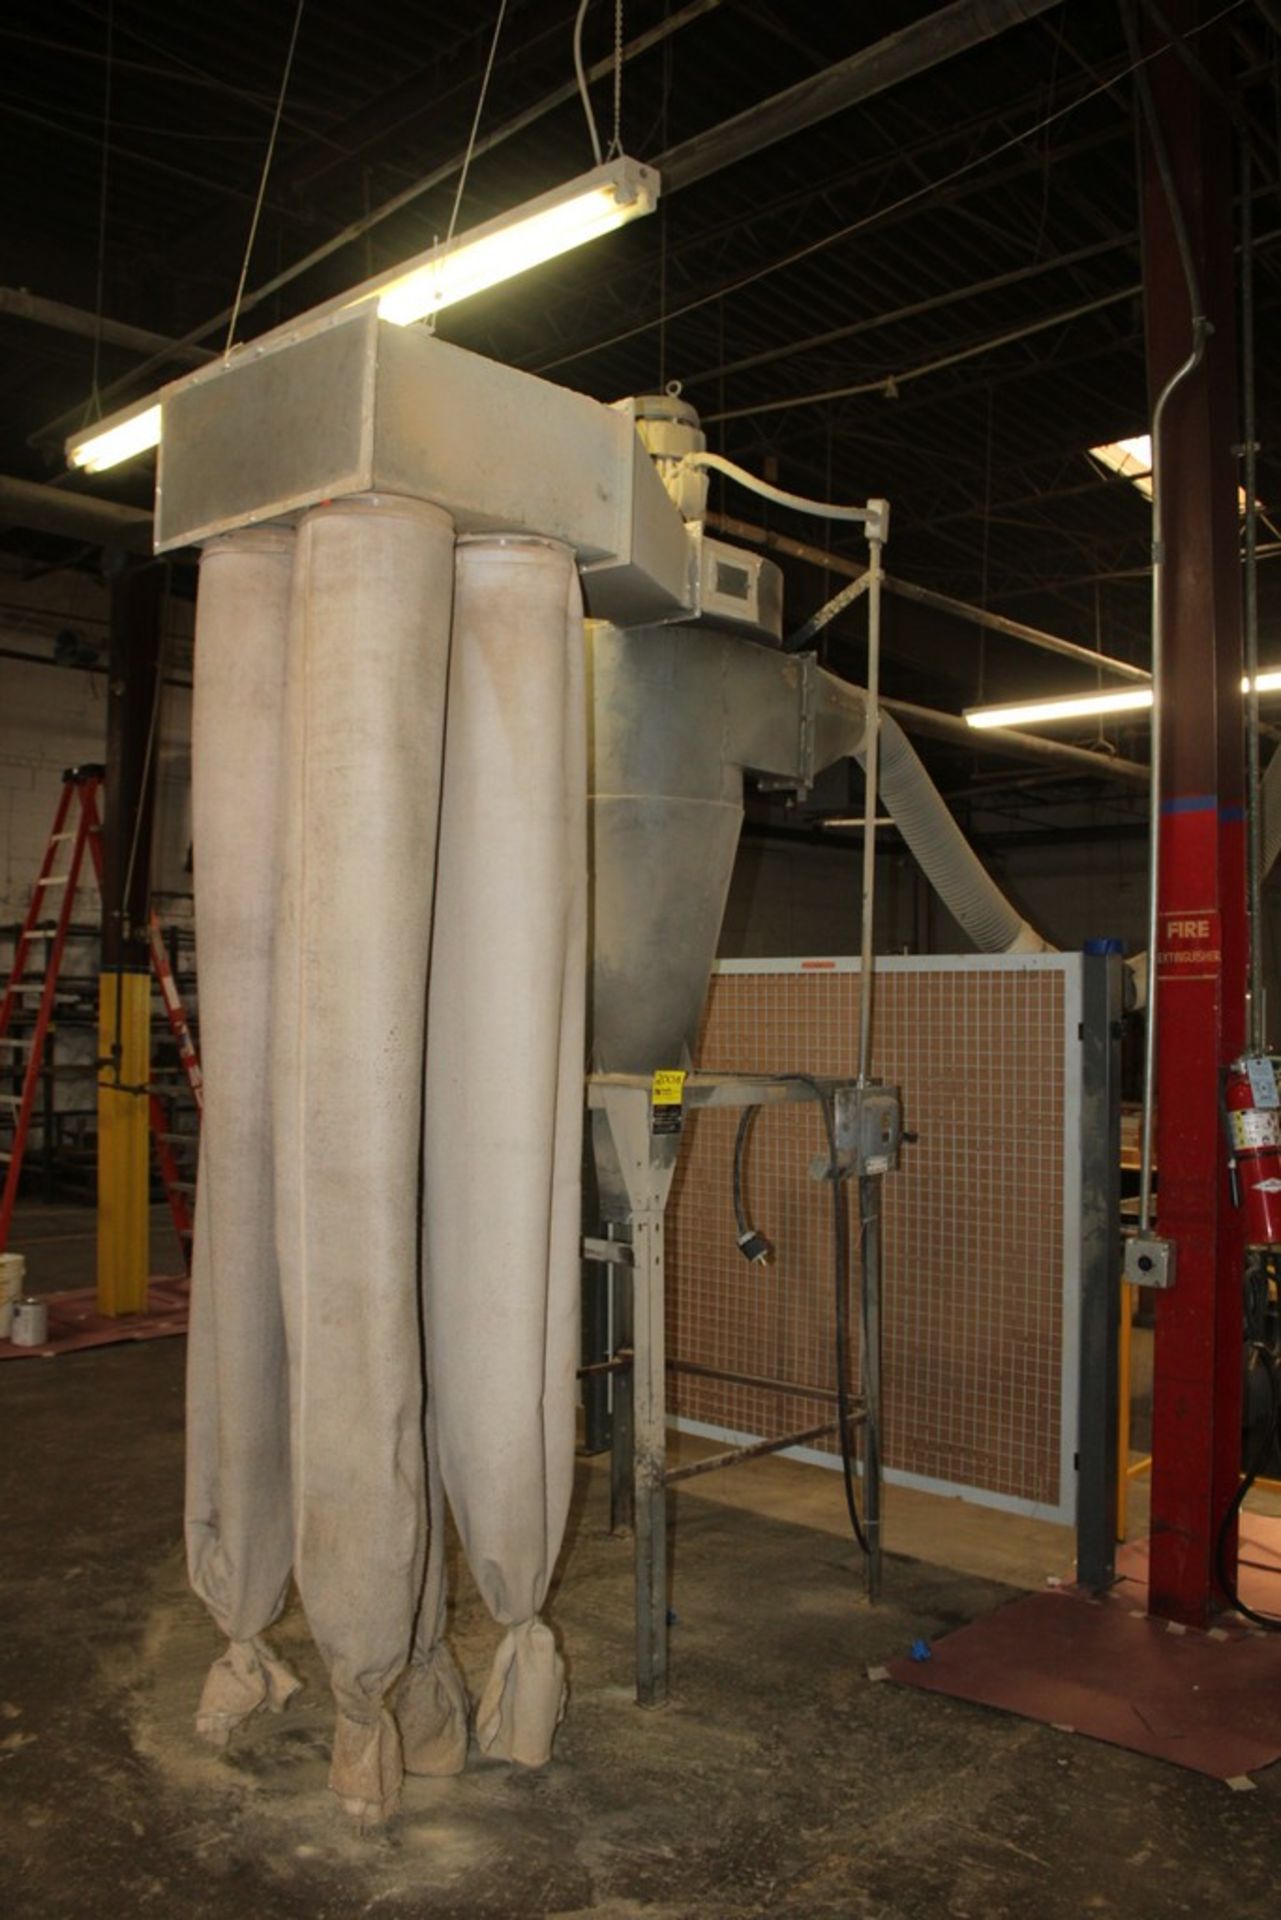 TORIT 4-BAG DUST COLLECTOR, MODEL 20-5-FB5-5, S/N 70877, 3-PHASE, 5HP, 220/440